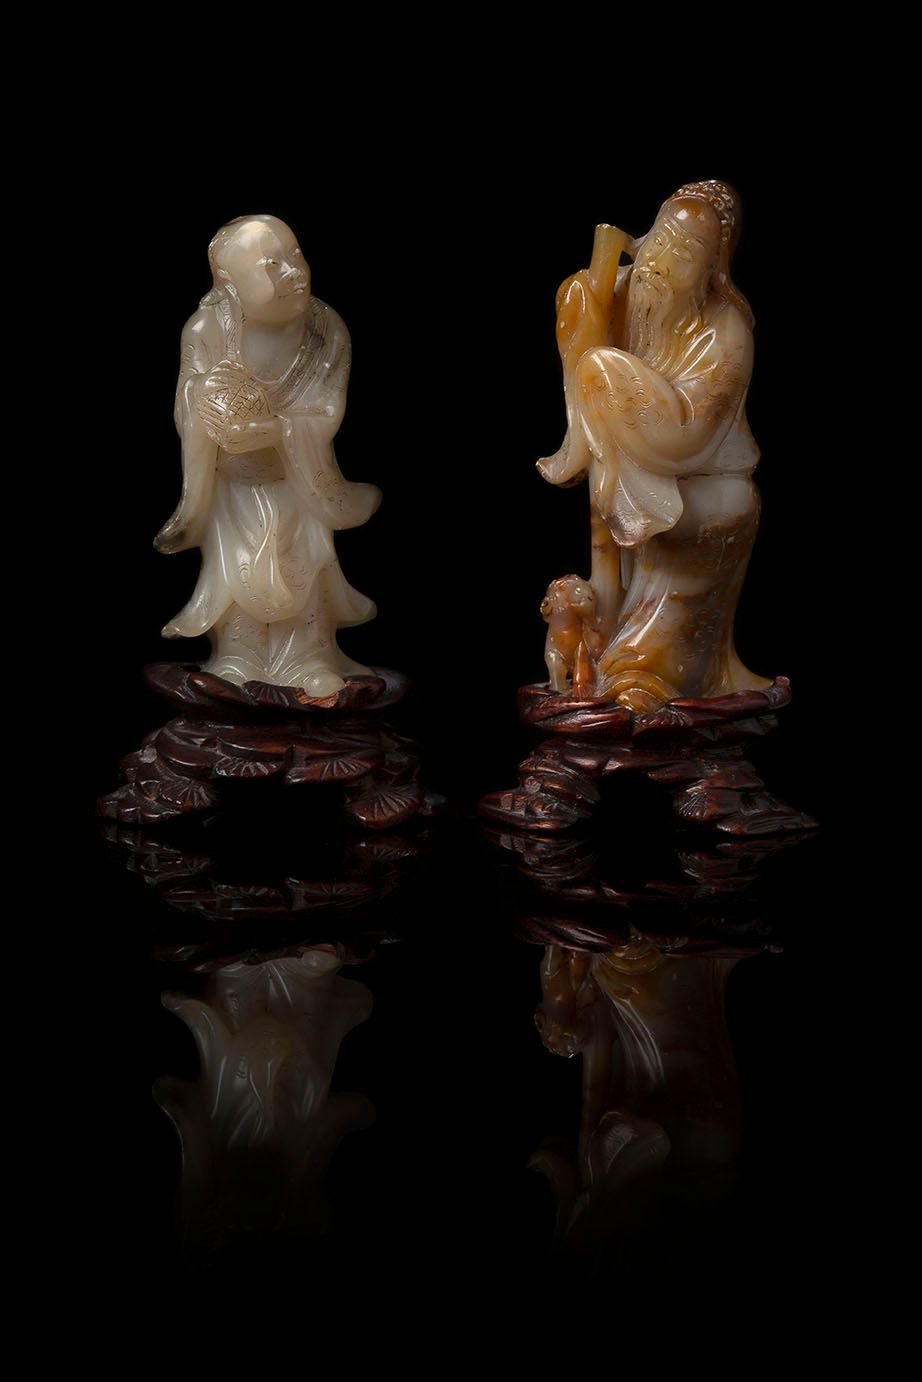 CHINE DYNASTIE QING (1644-1911) Set of two statuettes
Carved soapstone statuette&hellip;